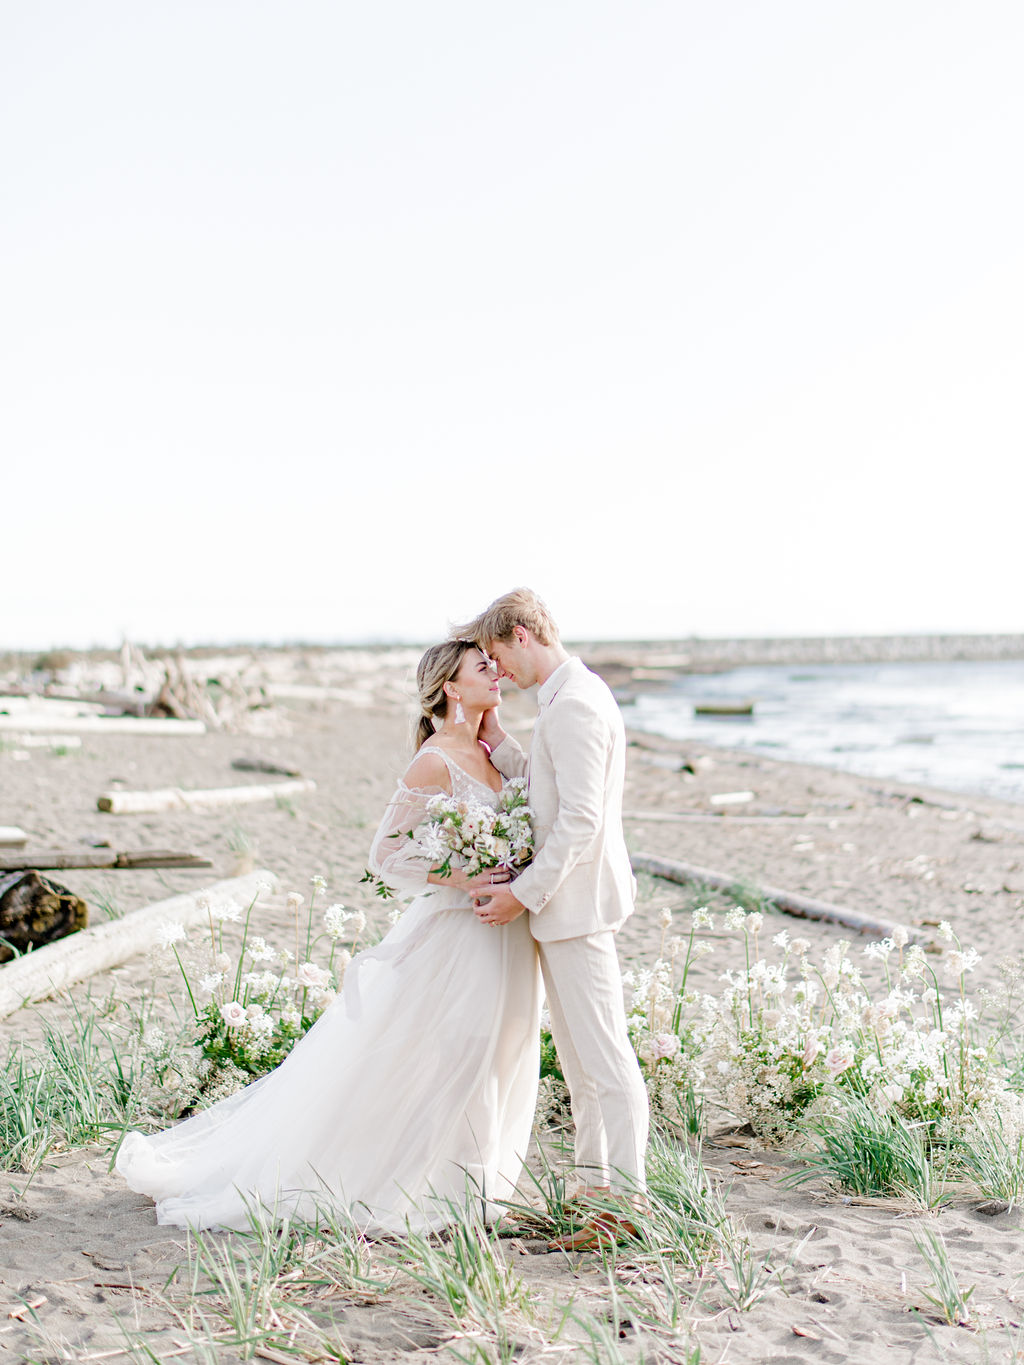 Romantic beach wedding ceremony in Vancouver, British Columbia; Fine art wedding inspiration for an intimate beach wedding, romantic wedding portraits in front of a grounded floral arch with organic greenery and blush and sand coloured florals in front of the ocean